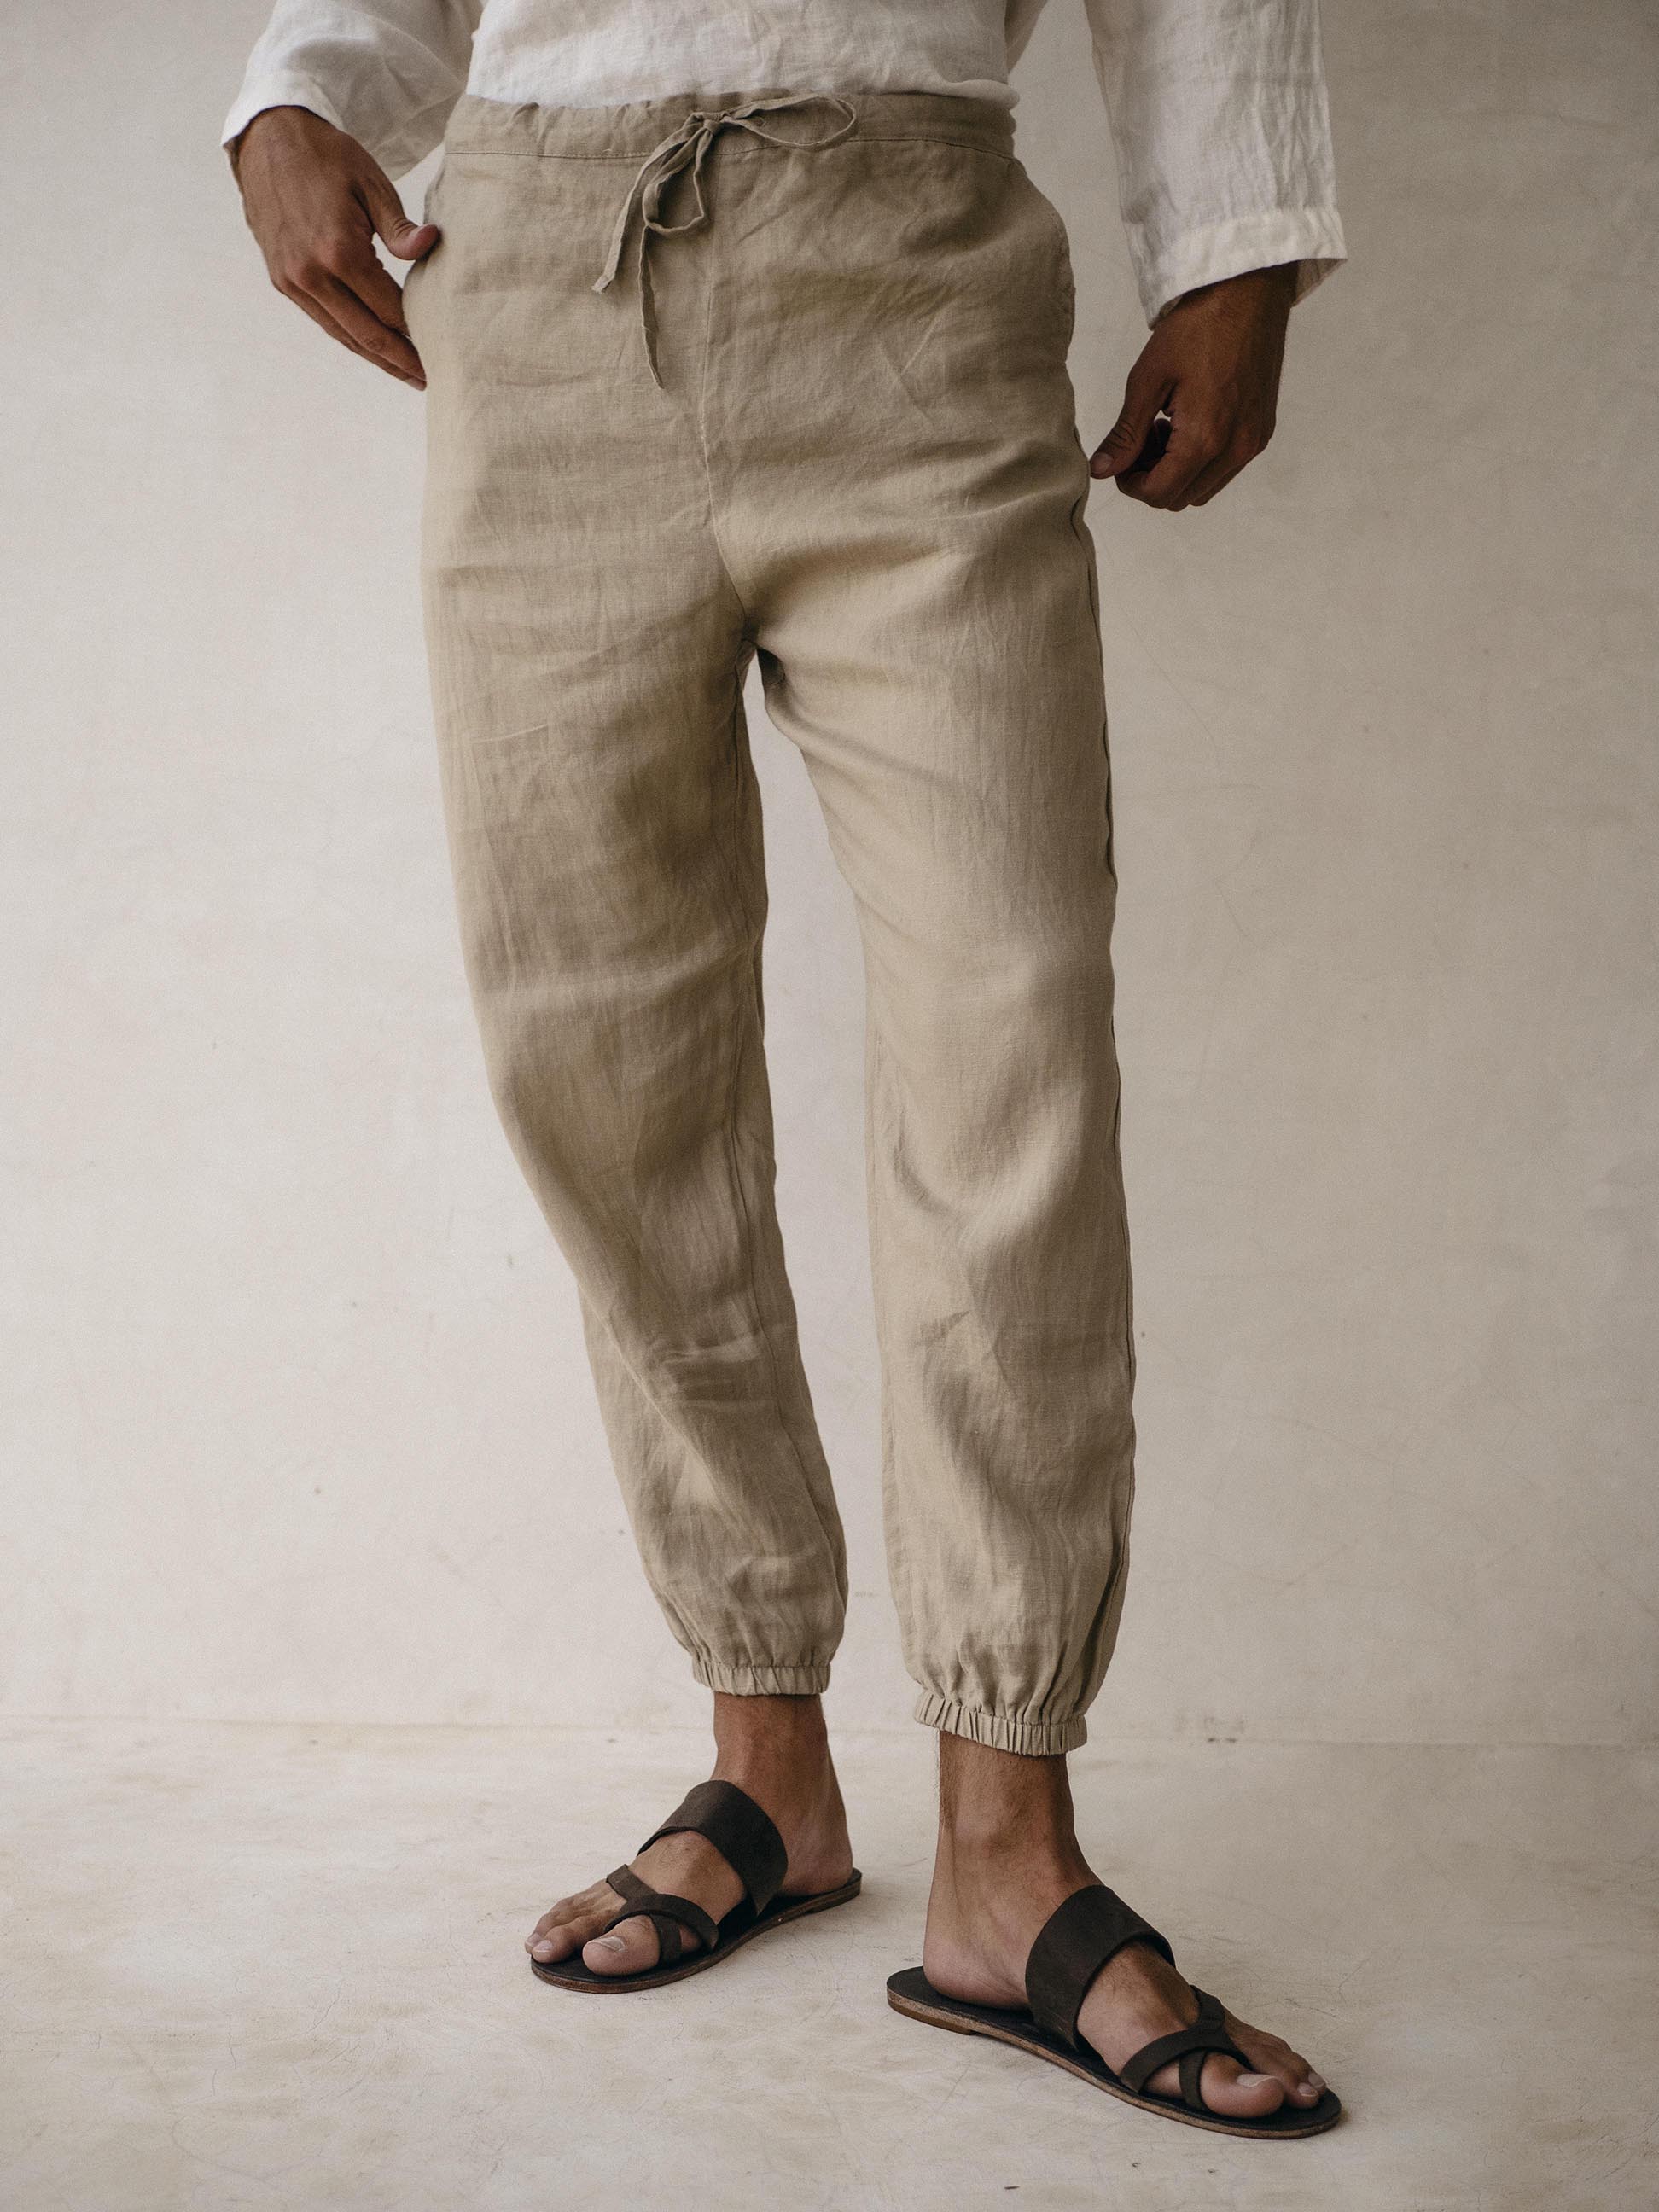 Men's linen joggers / drawstring pants with pockets ︱ - In the